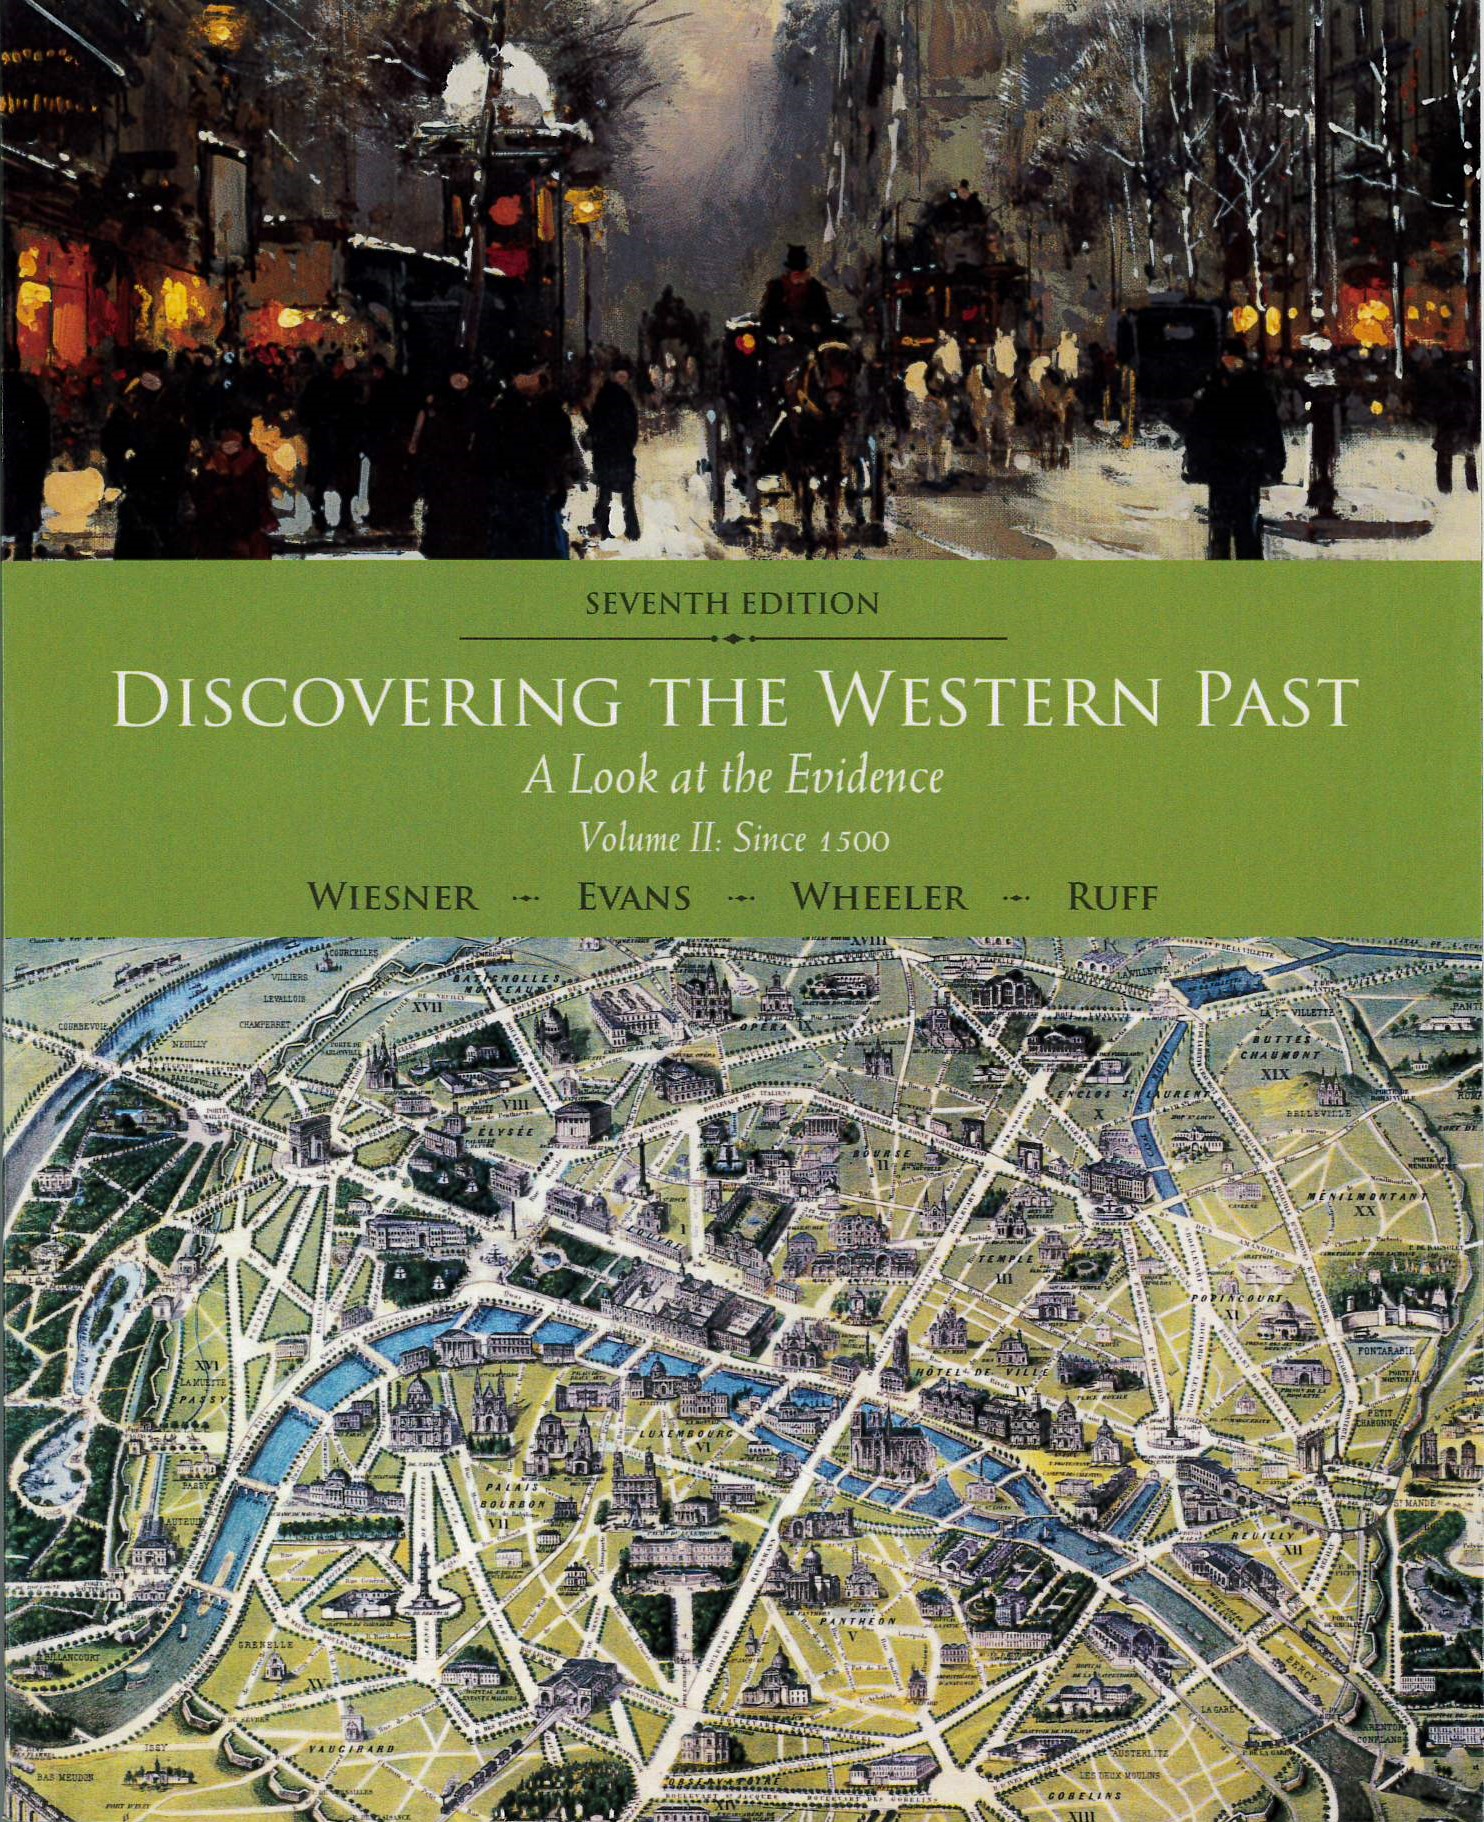 Discovering the western past (Vol. II: science 1500) : a look at the evidence